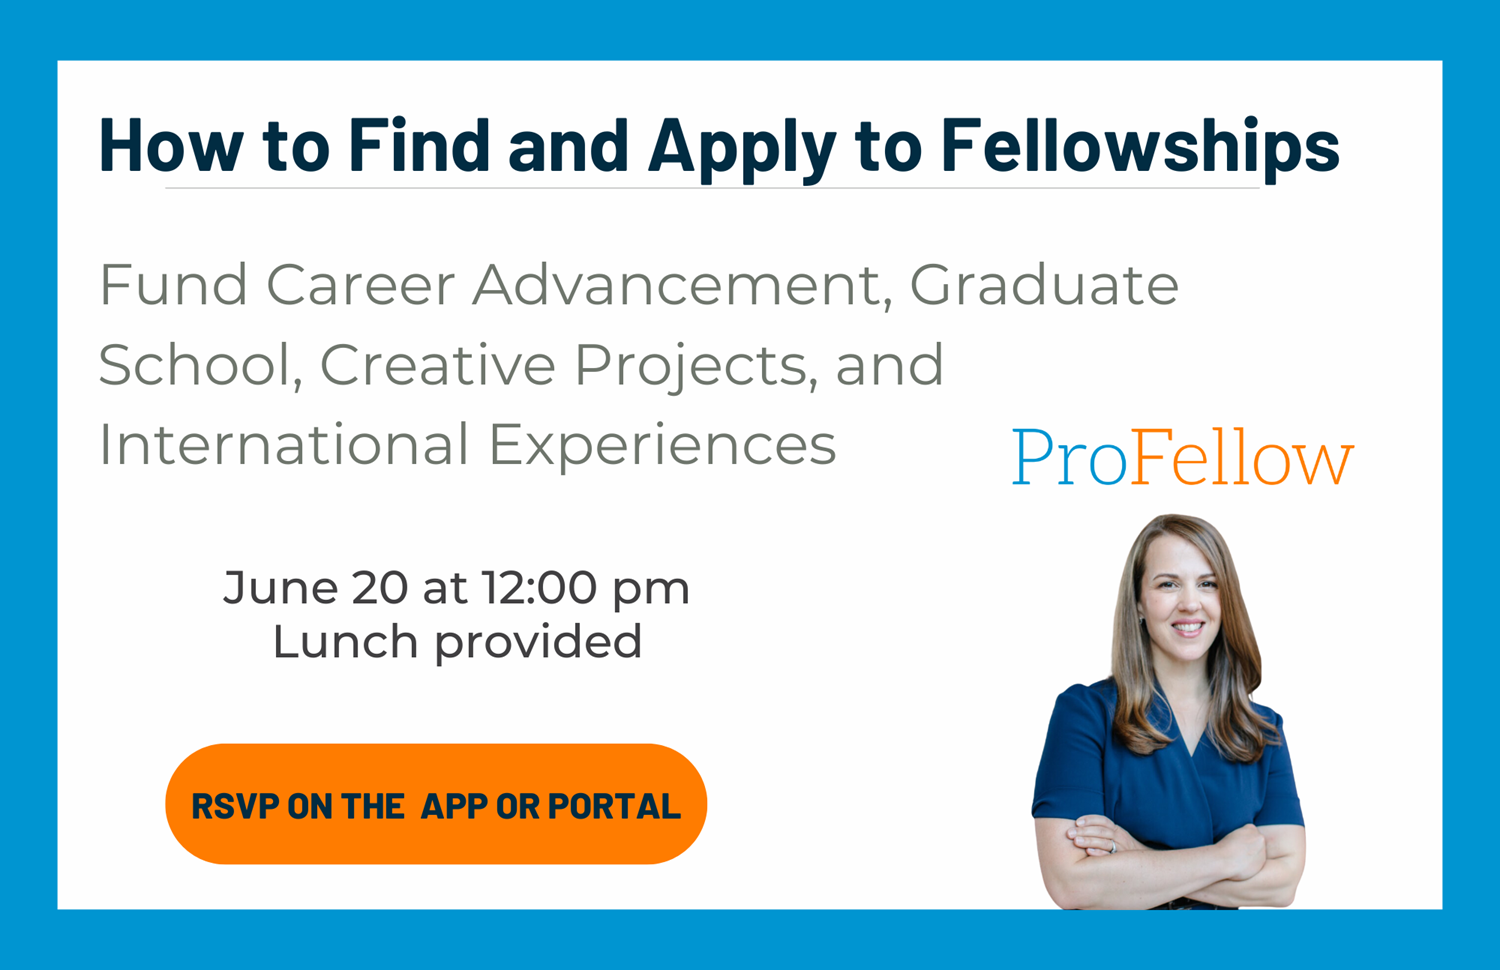 How to Find and Apply to Fellowships Workshop